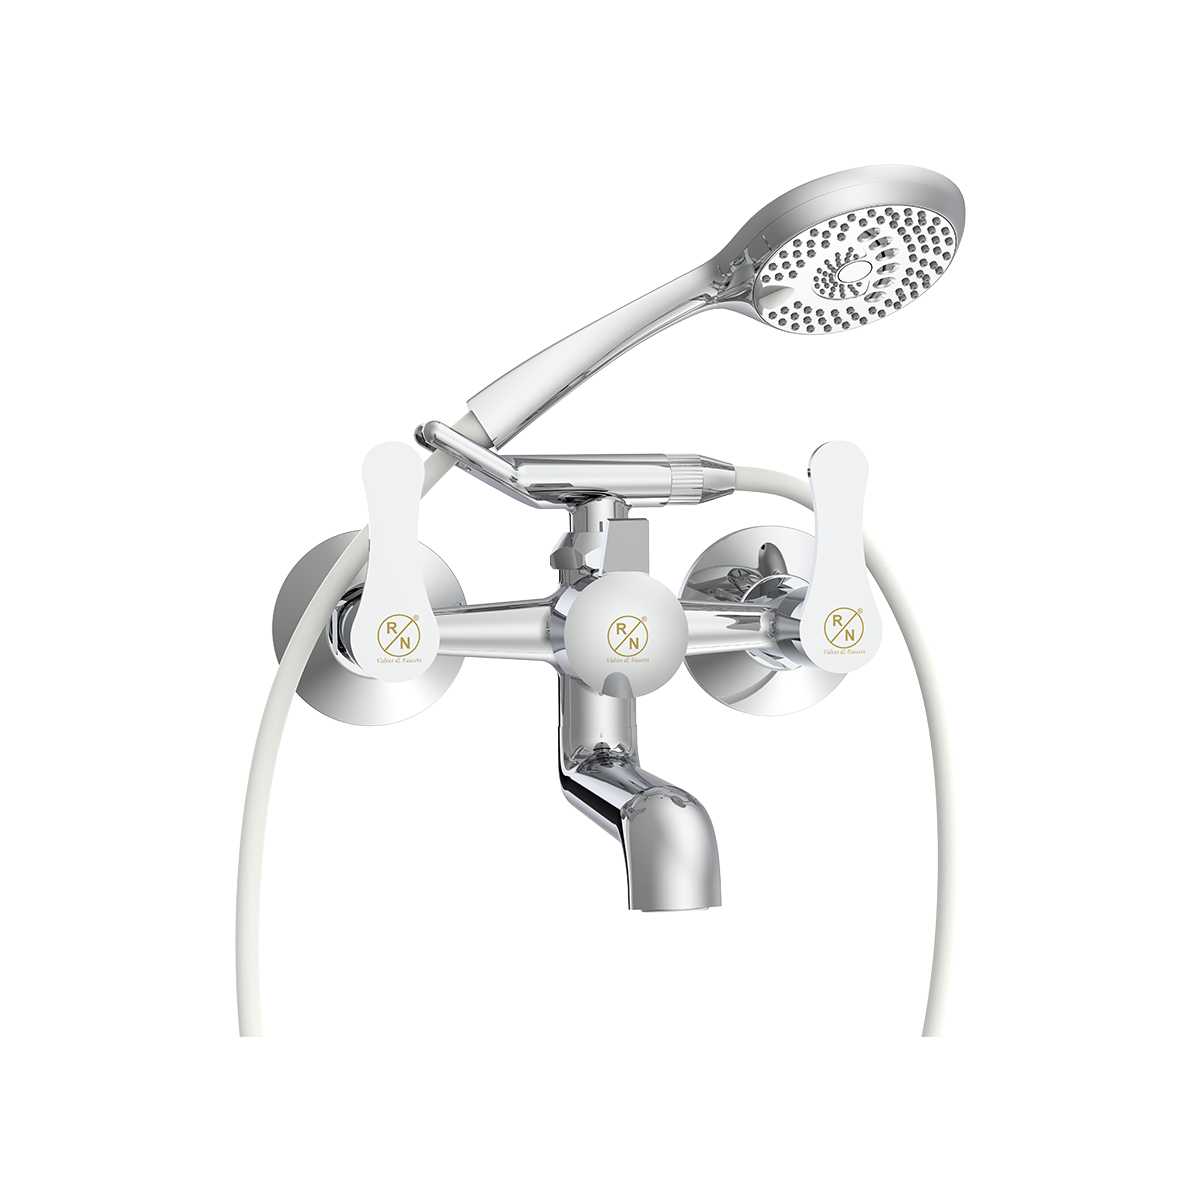 Wall Mixer With Provision Of Hand Shower With Crutch